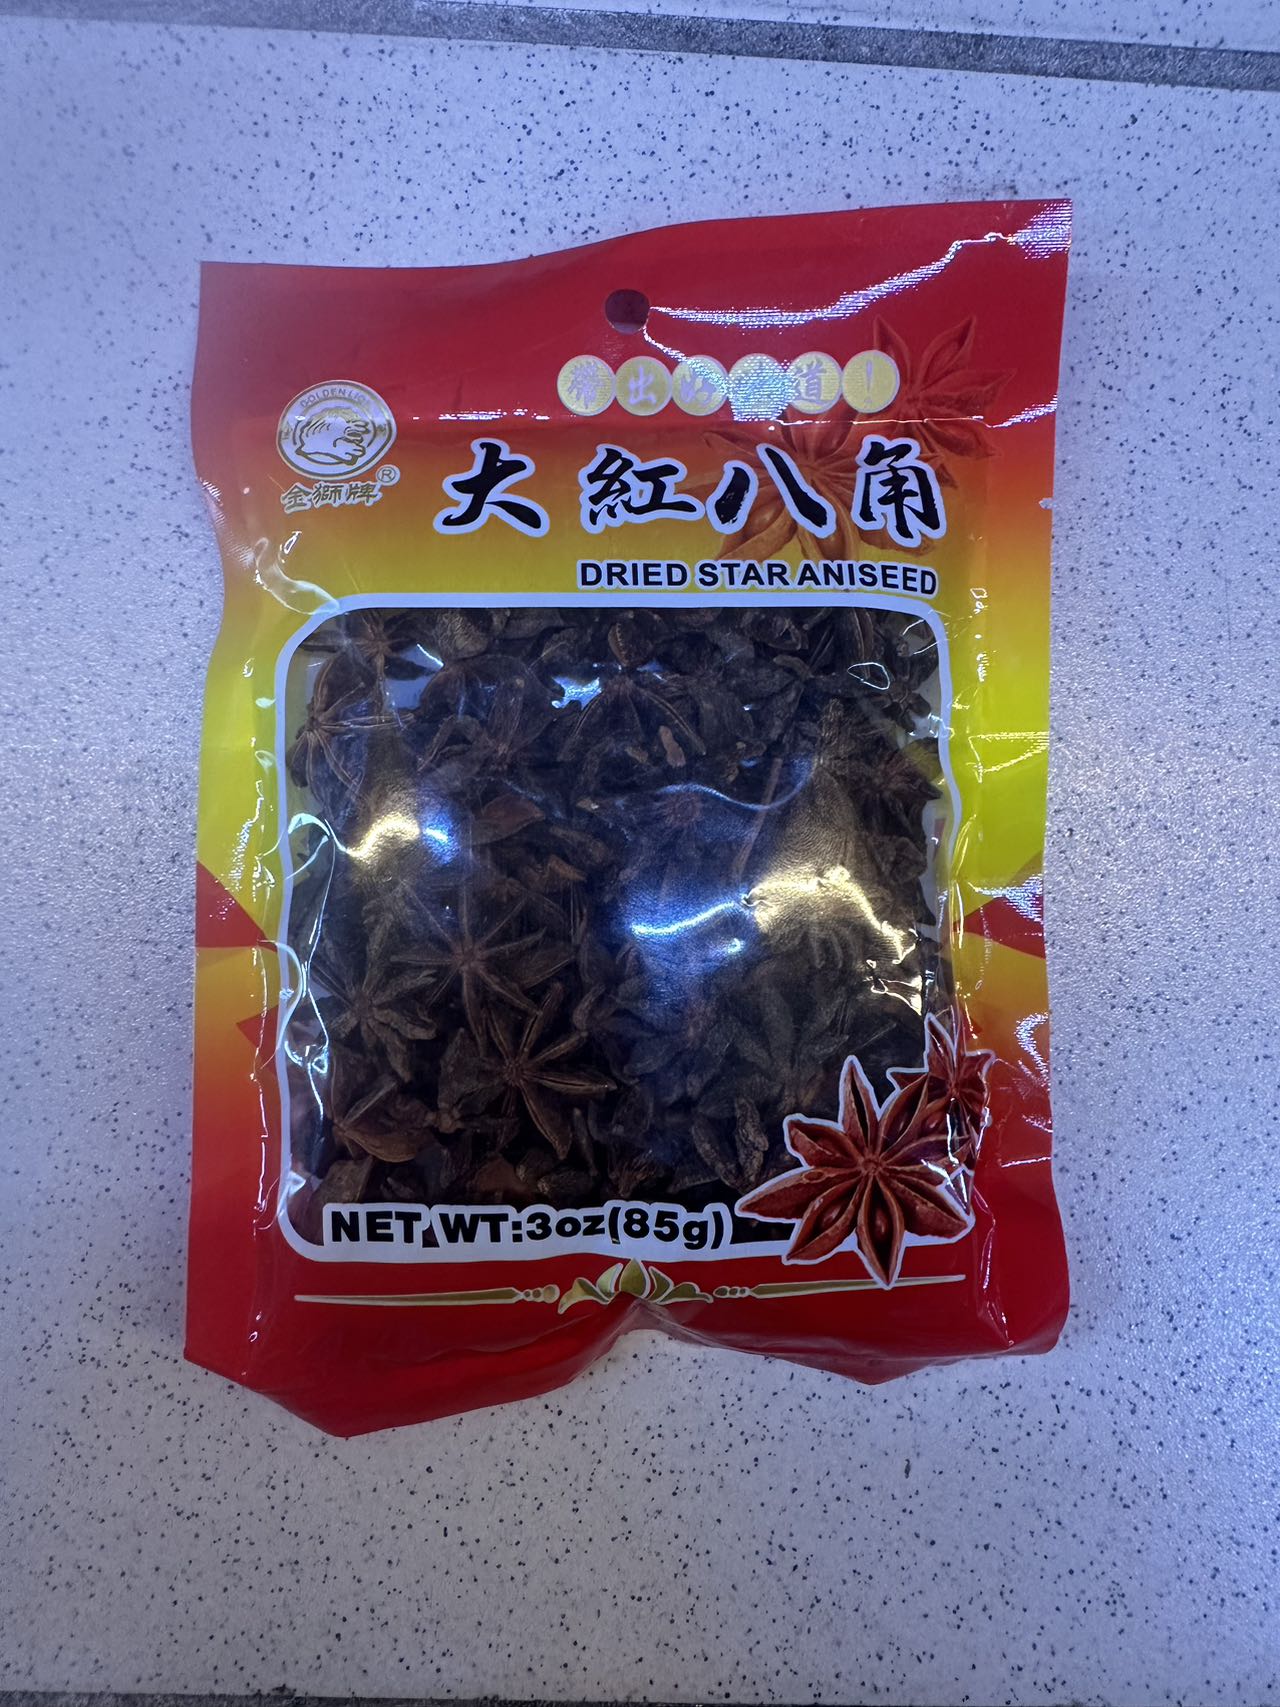 Big red star anise